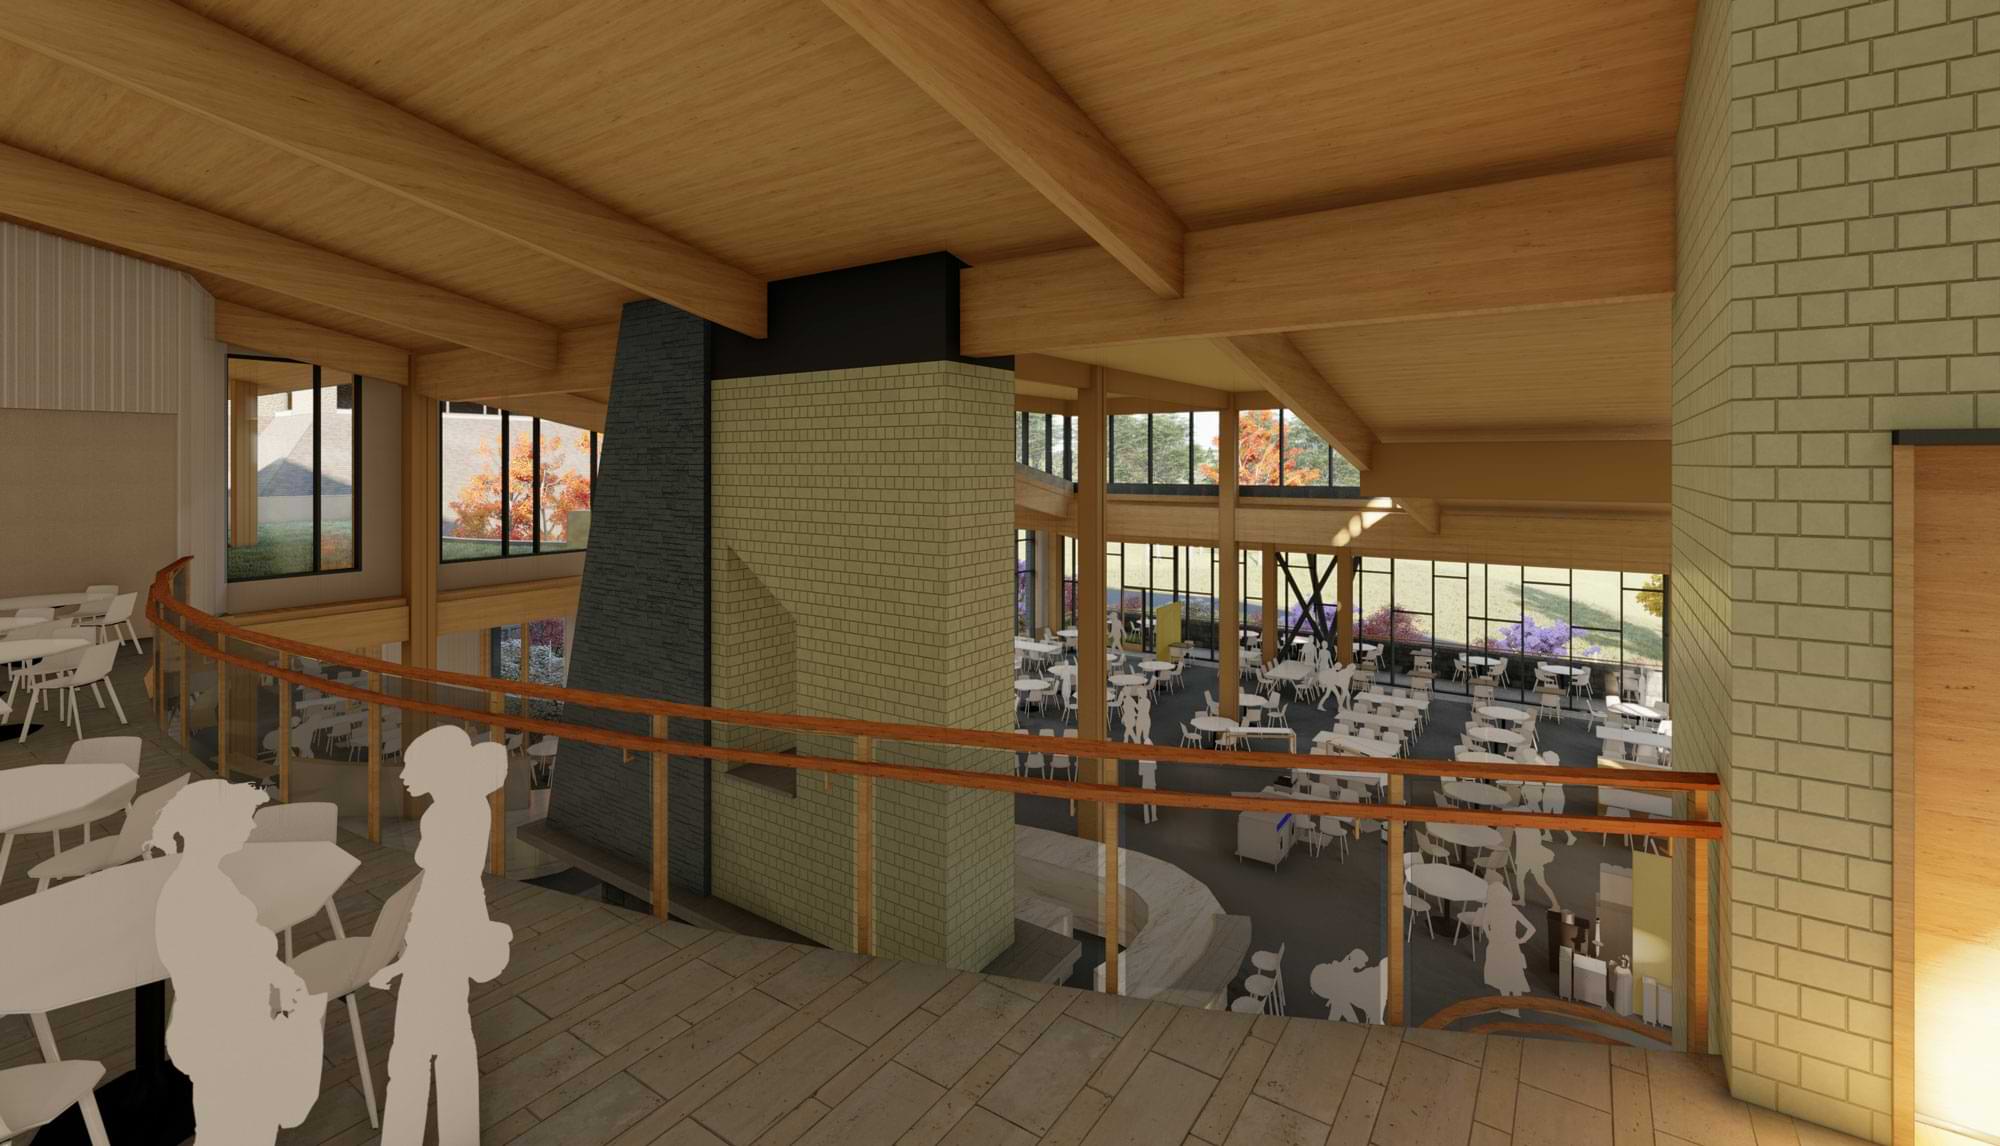 The vision for a new Dining and Community Commons, which is now under construction